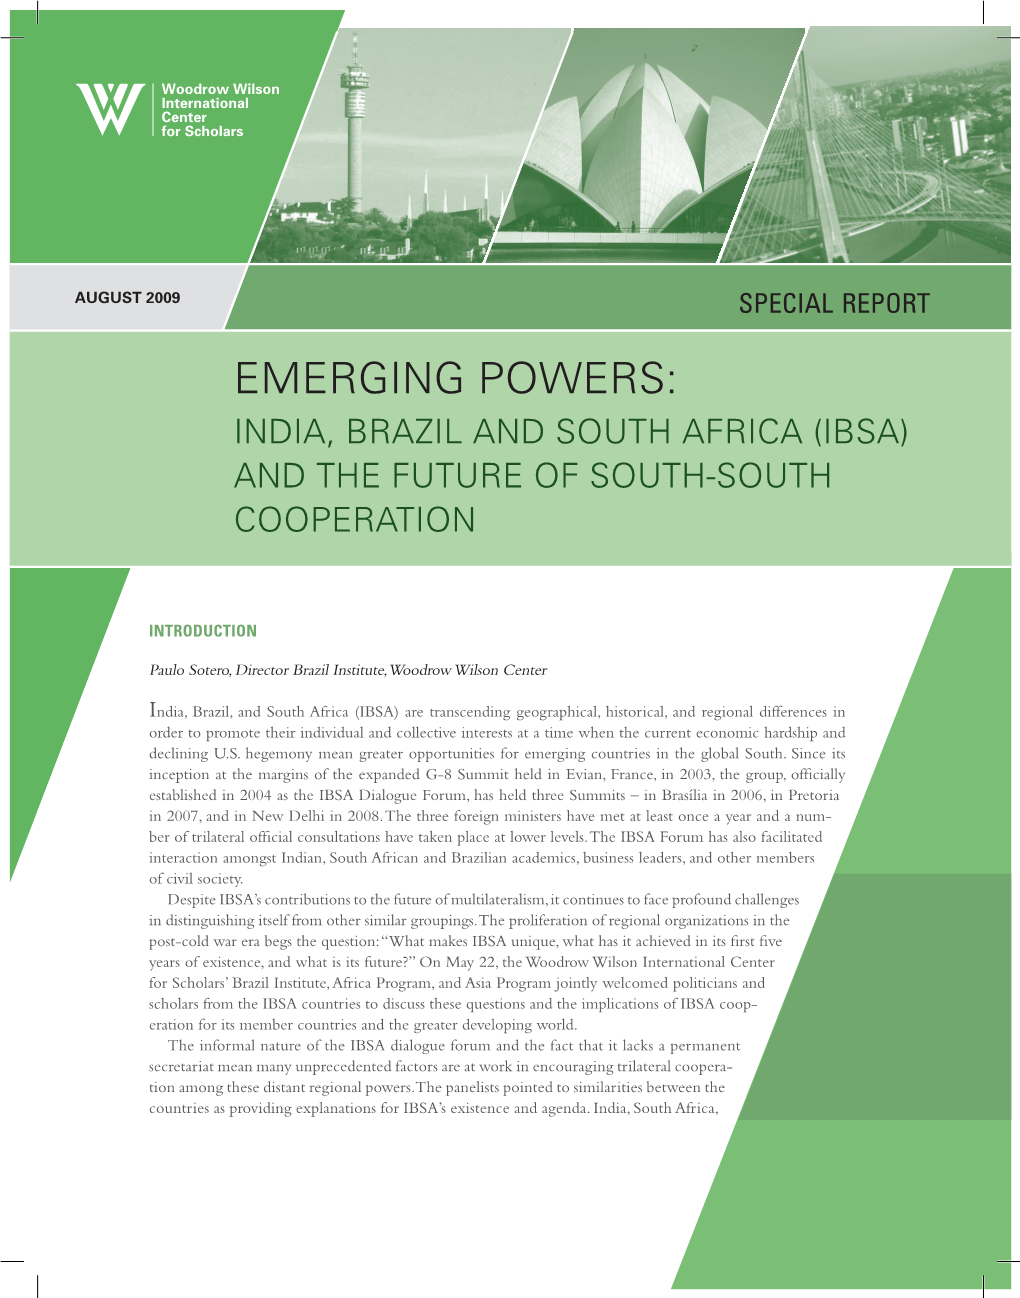 Emerging Powers: India, Brazil and South Africa (IBSA) and the Future of South-South Cooperation